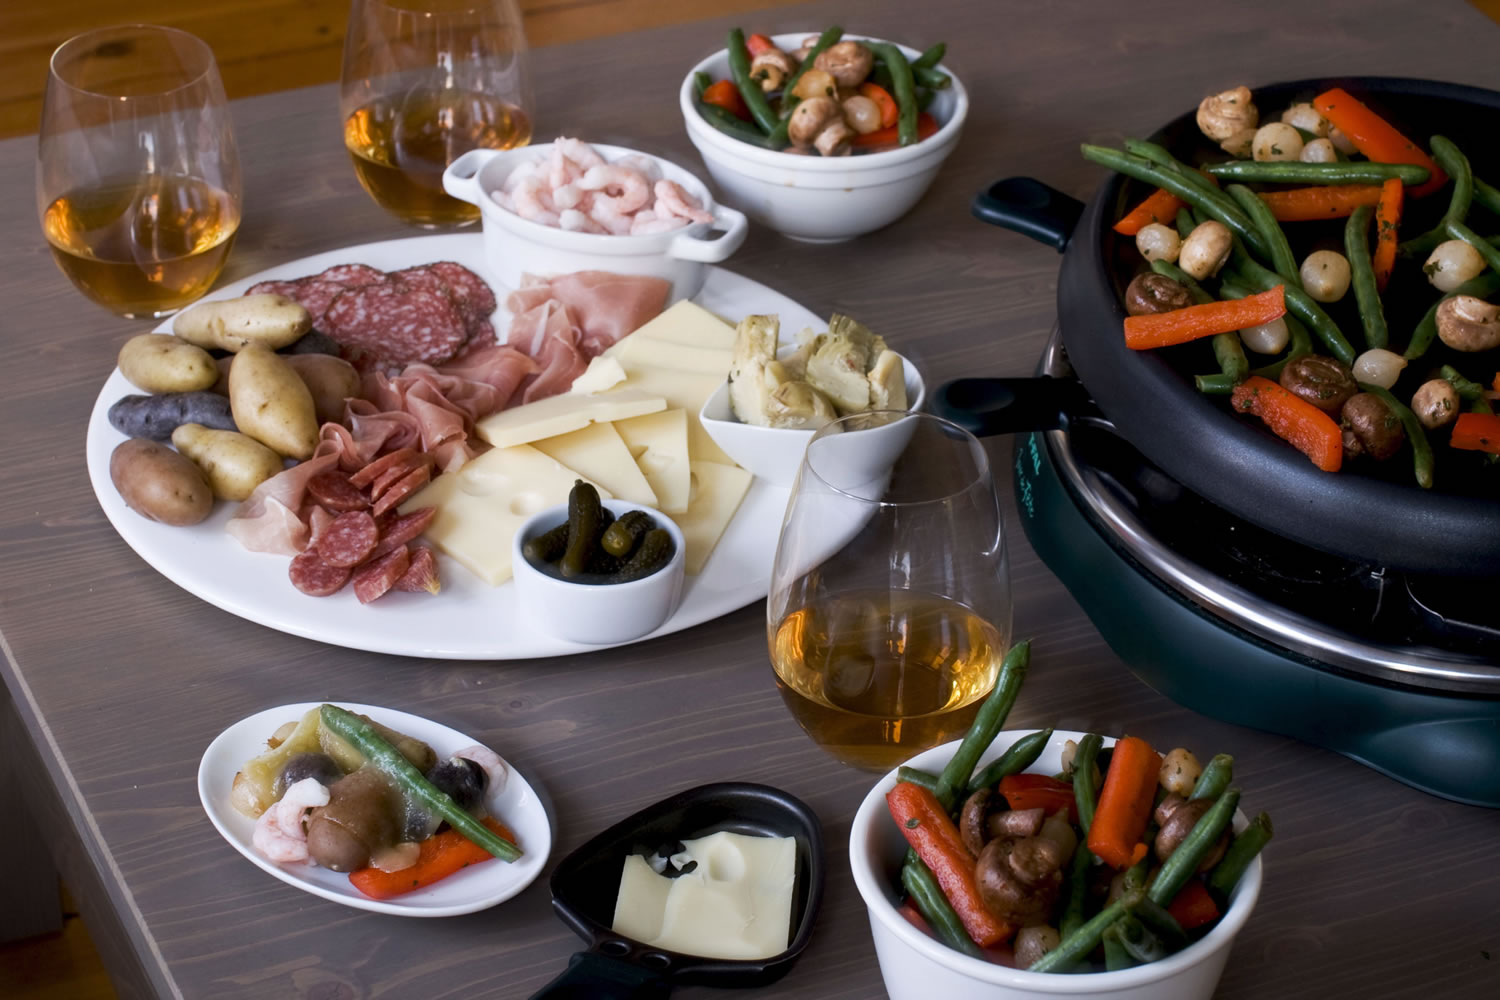 Photos by Matthew Mead/Associated Press
Raclette is a comfort food in France and Switzerland. The dish is perfect for a leisurely day after a night of partying.